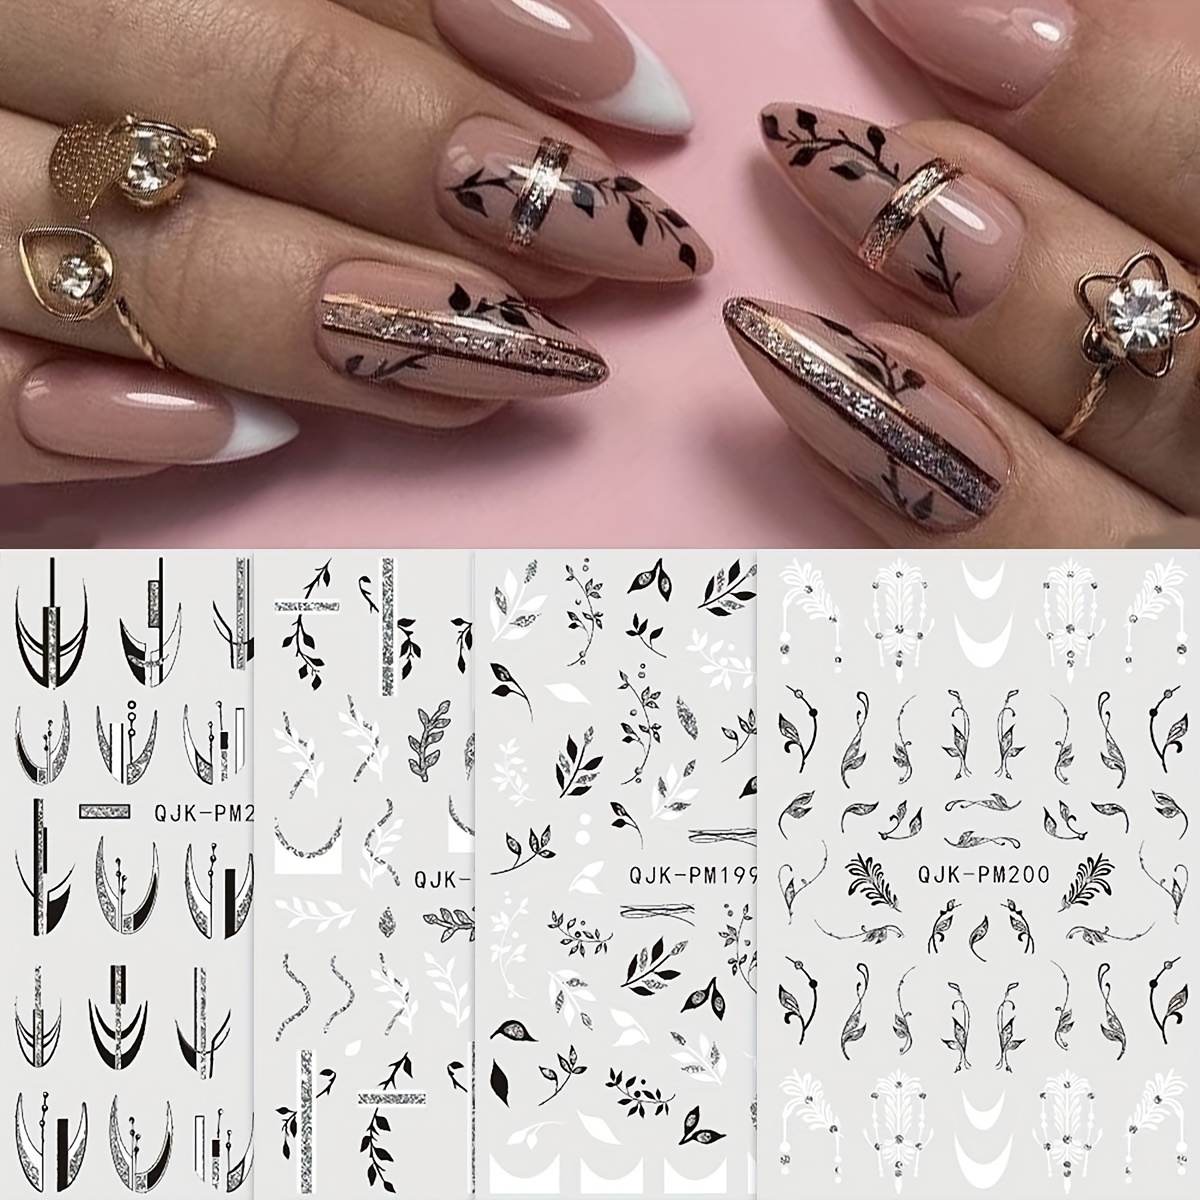 

4 Sheets Black Silver 3d Nail Stickers Spring Flowers Leaves Glitter Sequin Geometric Lines French Nails Adhesive Stickers Decals Manicure Decorations